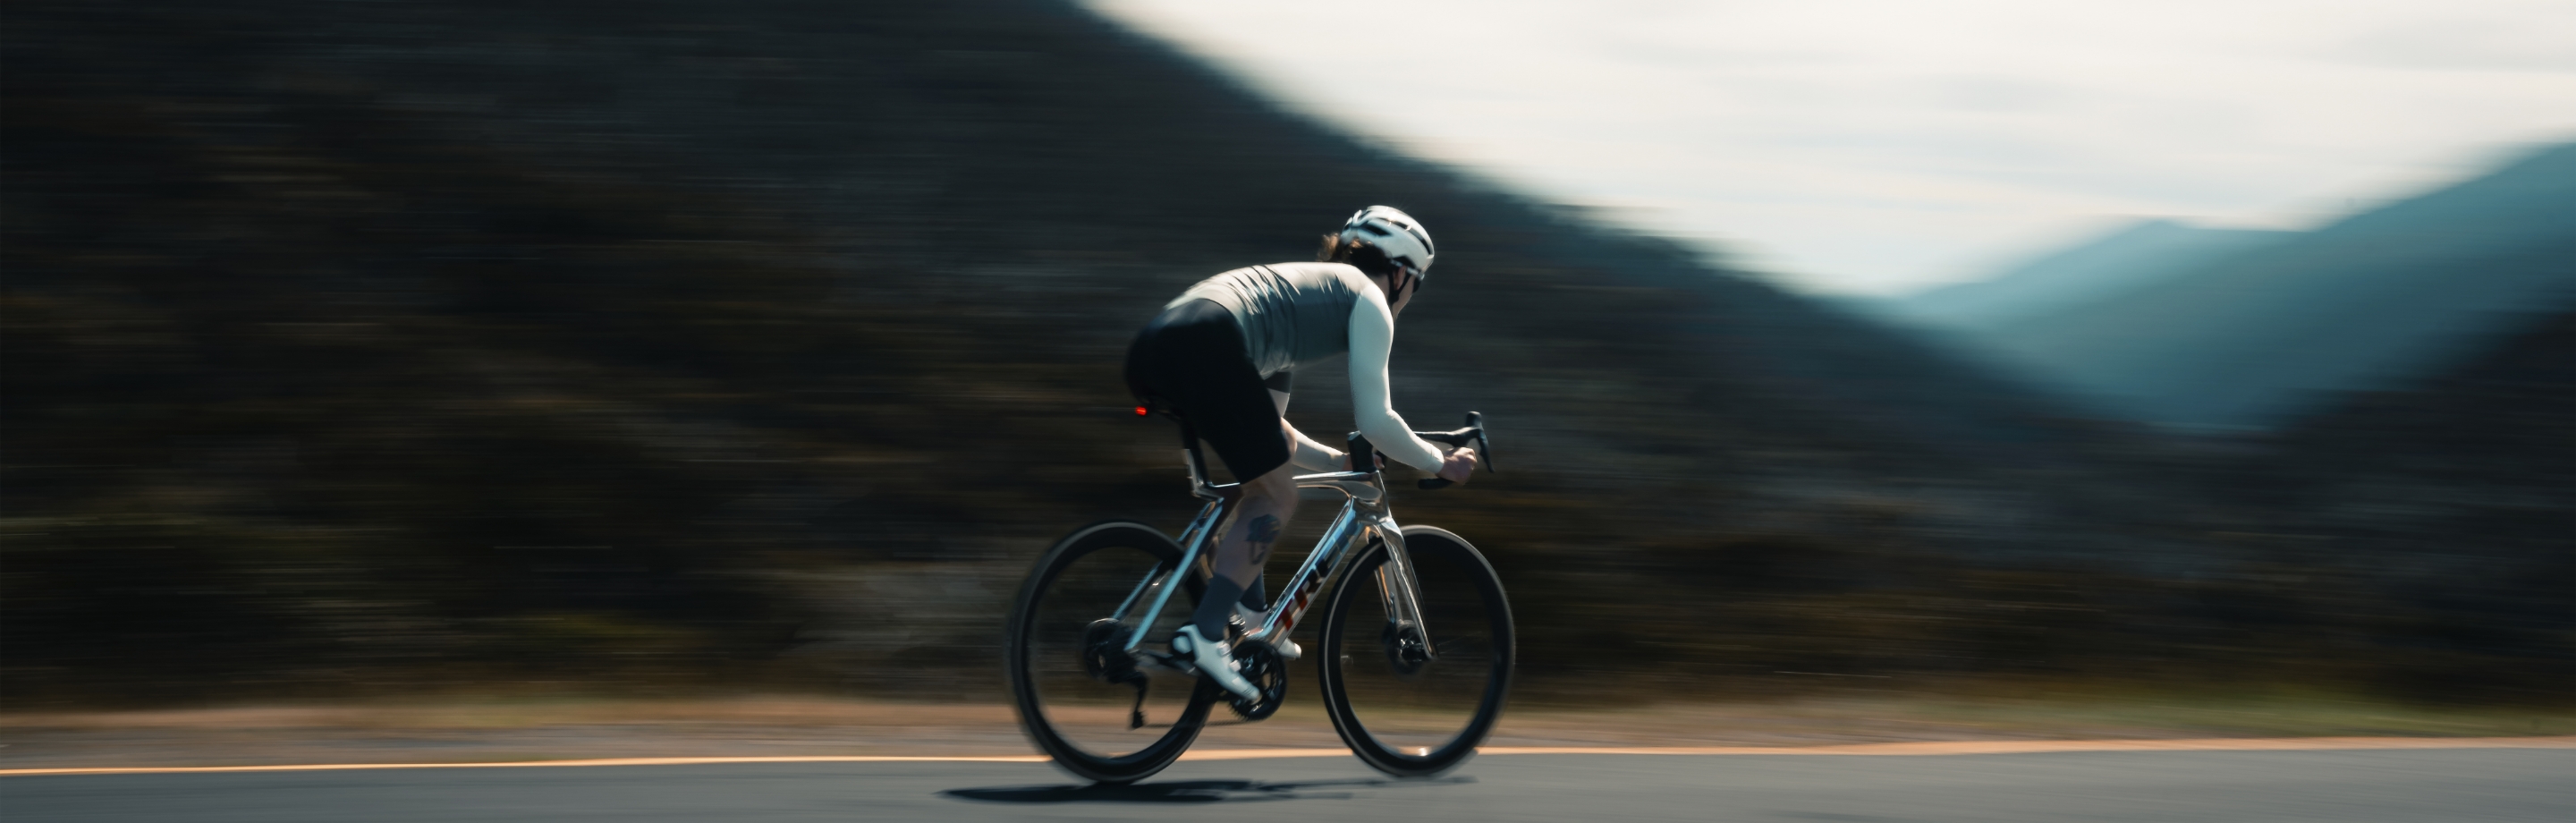 Rapha – The World‘s Finest Cycling Clothing and Accessoires